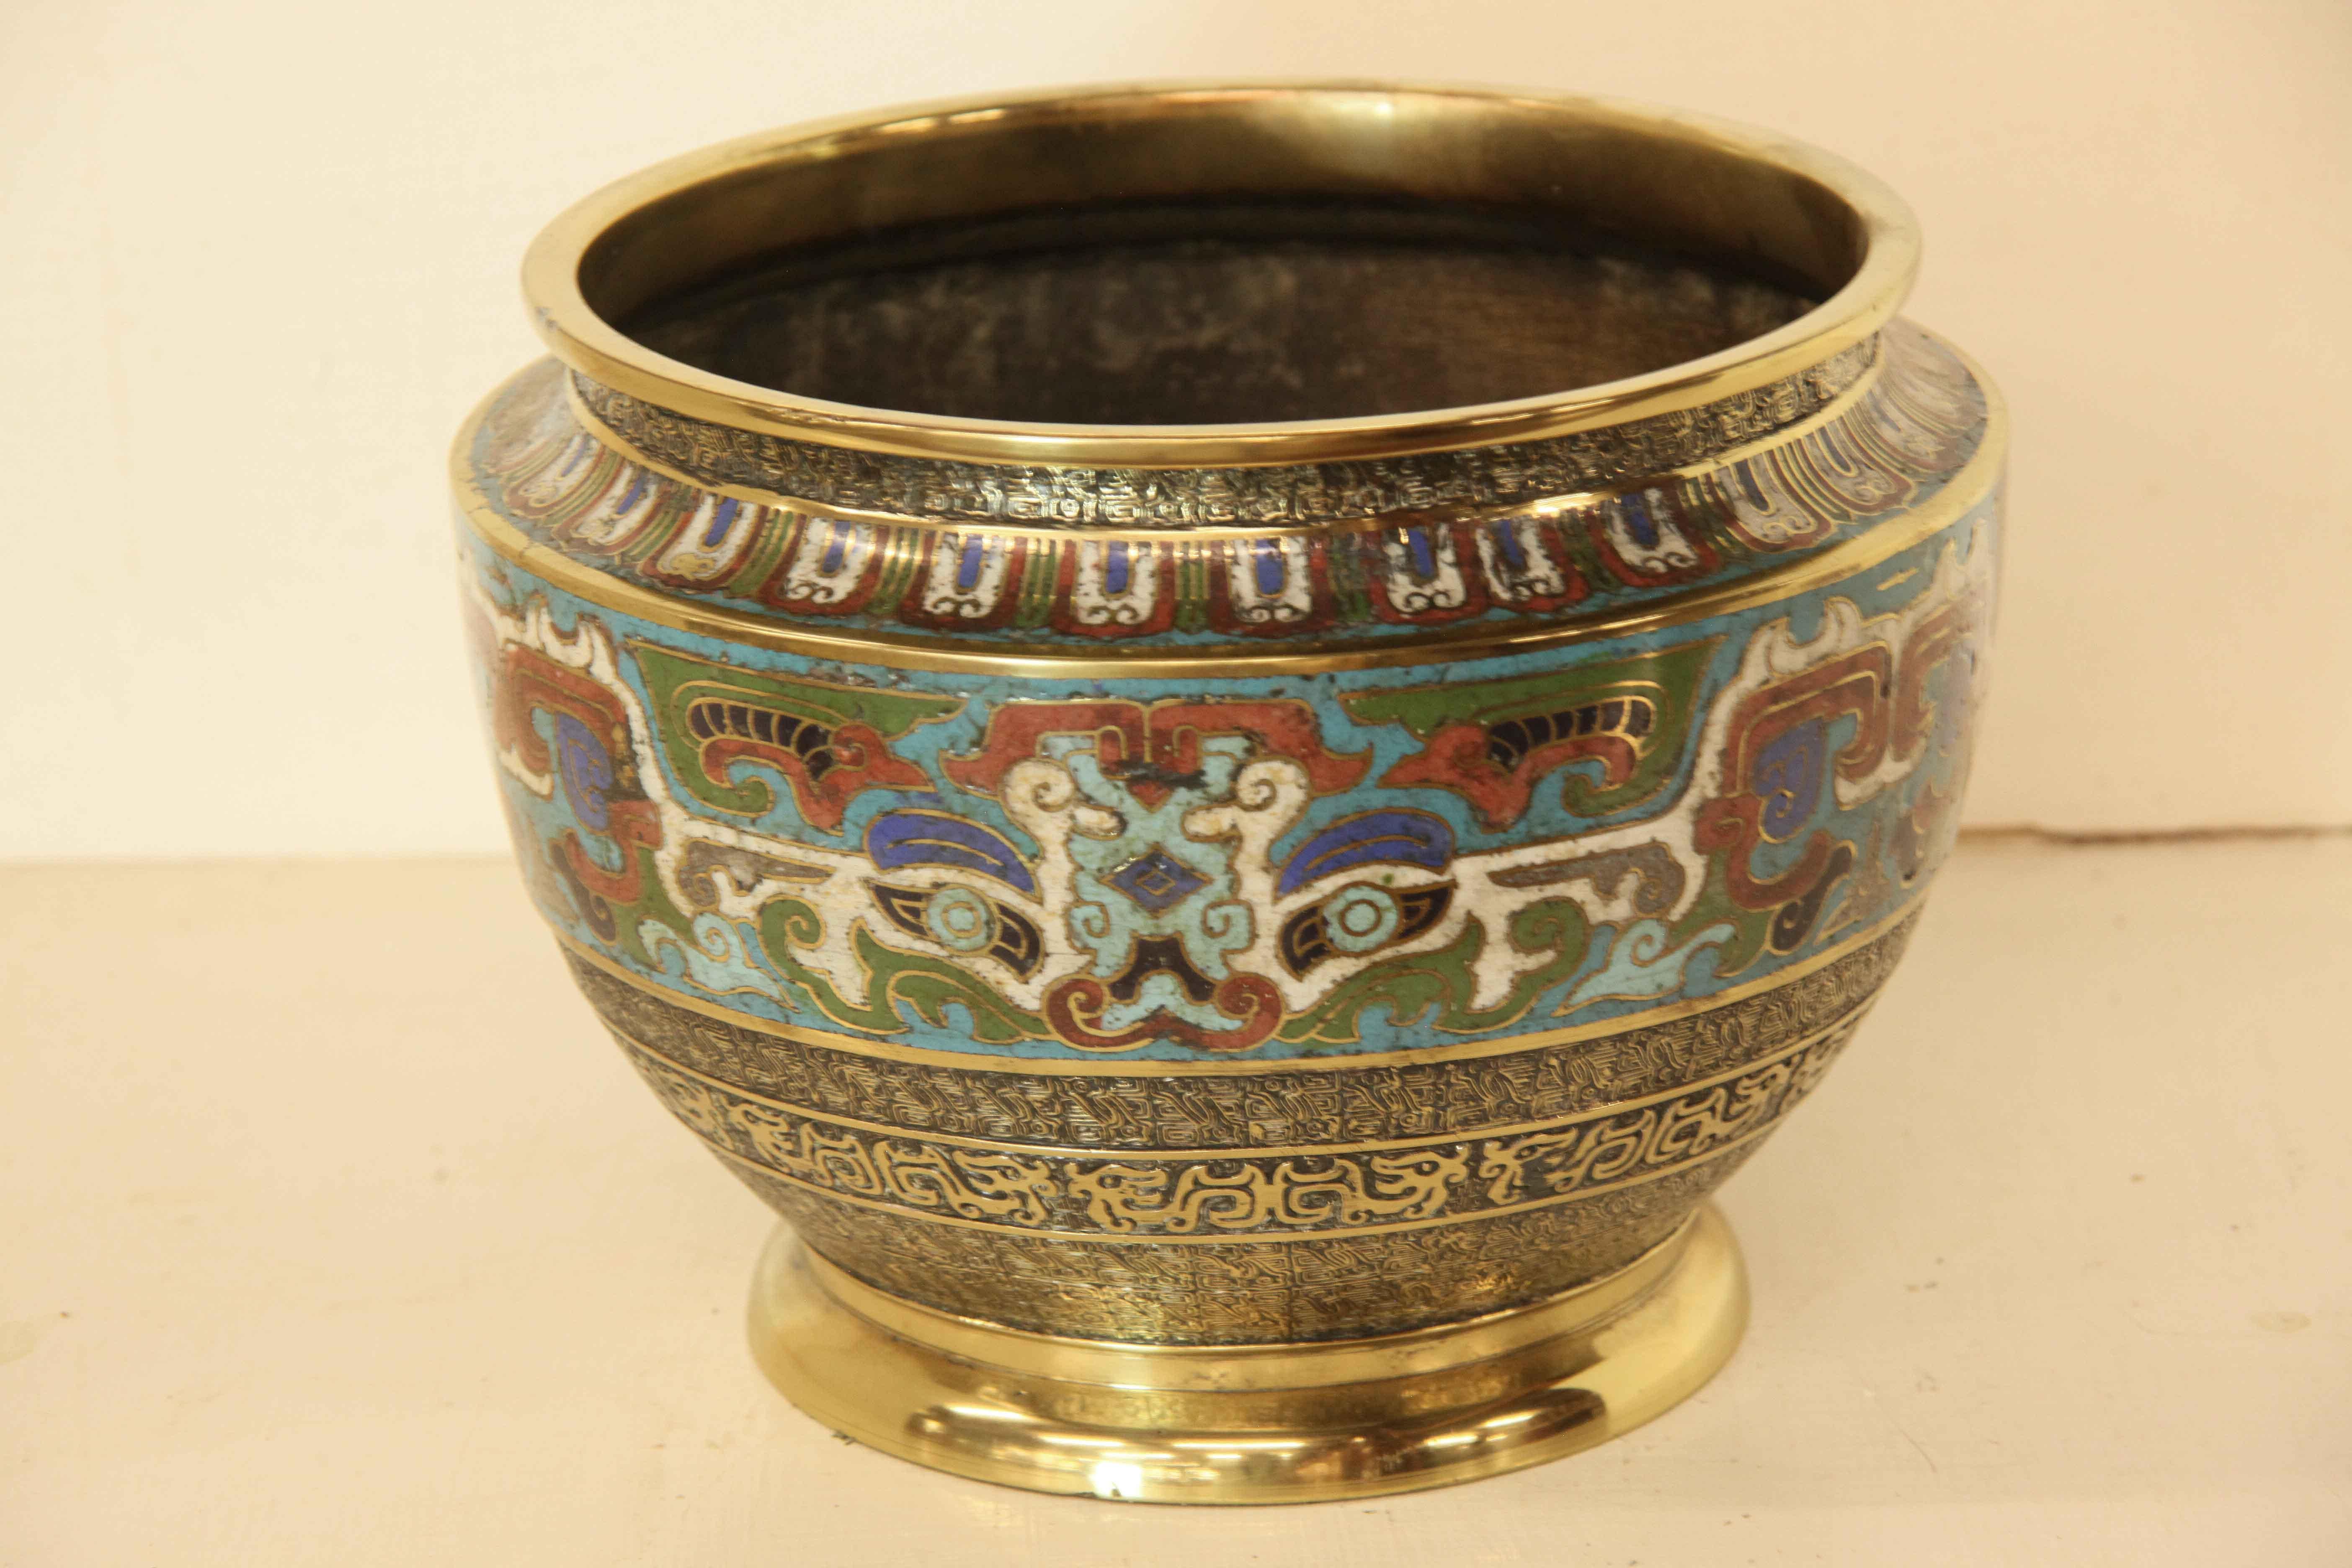 Japanese champleve cache pot,  the rim has a repetitive pattern of vertical brass with a mixture of colors (red, white, green and blue) alternating with a turquoise running below it. The main wide enamel section in the middle also features these